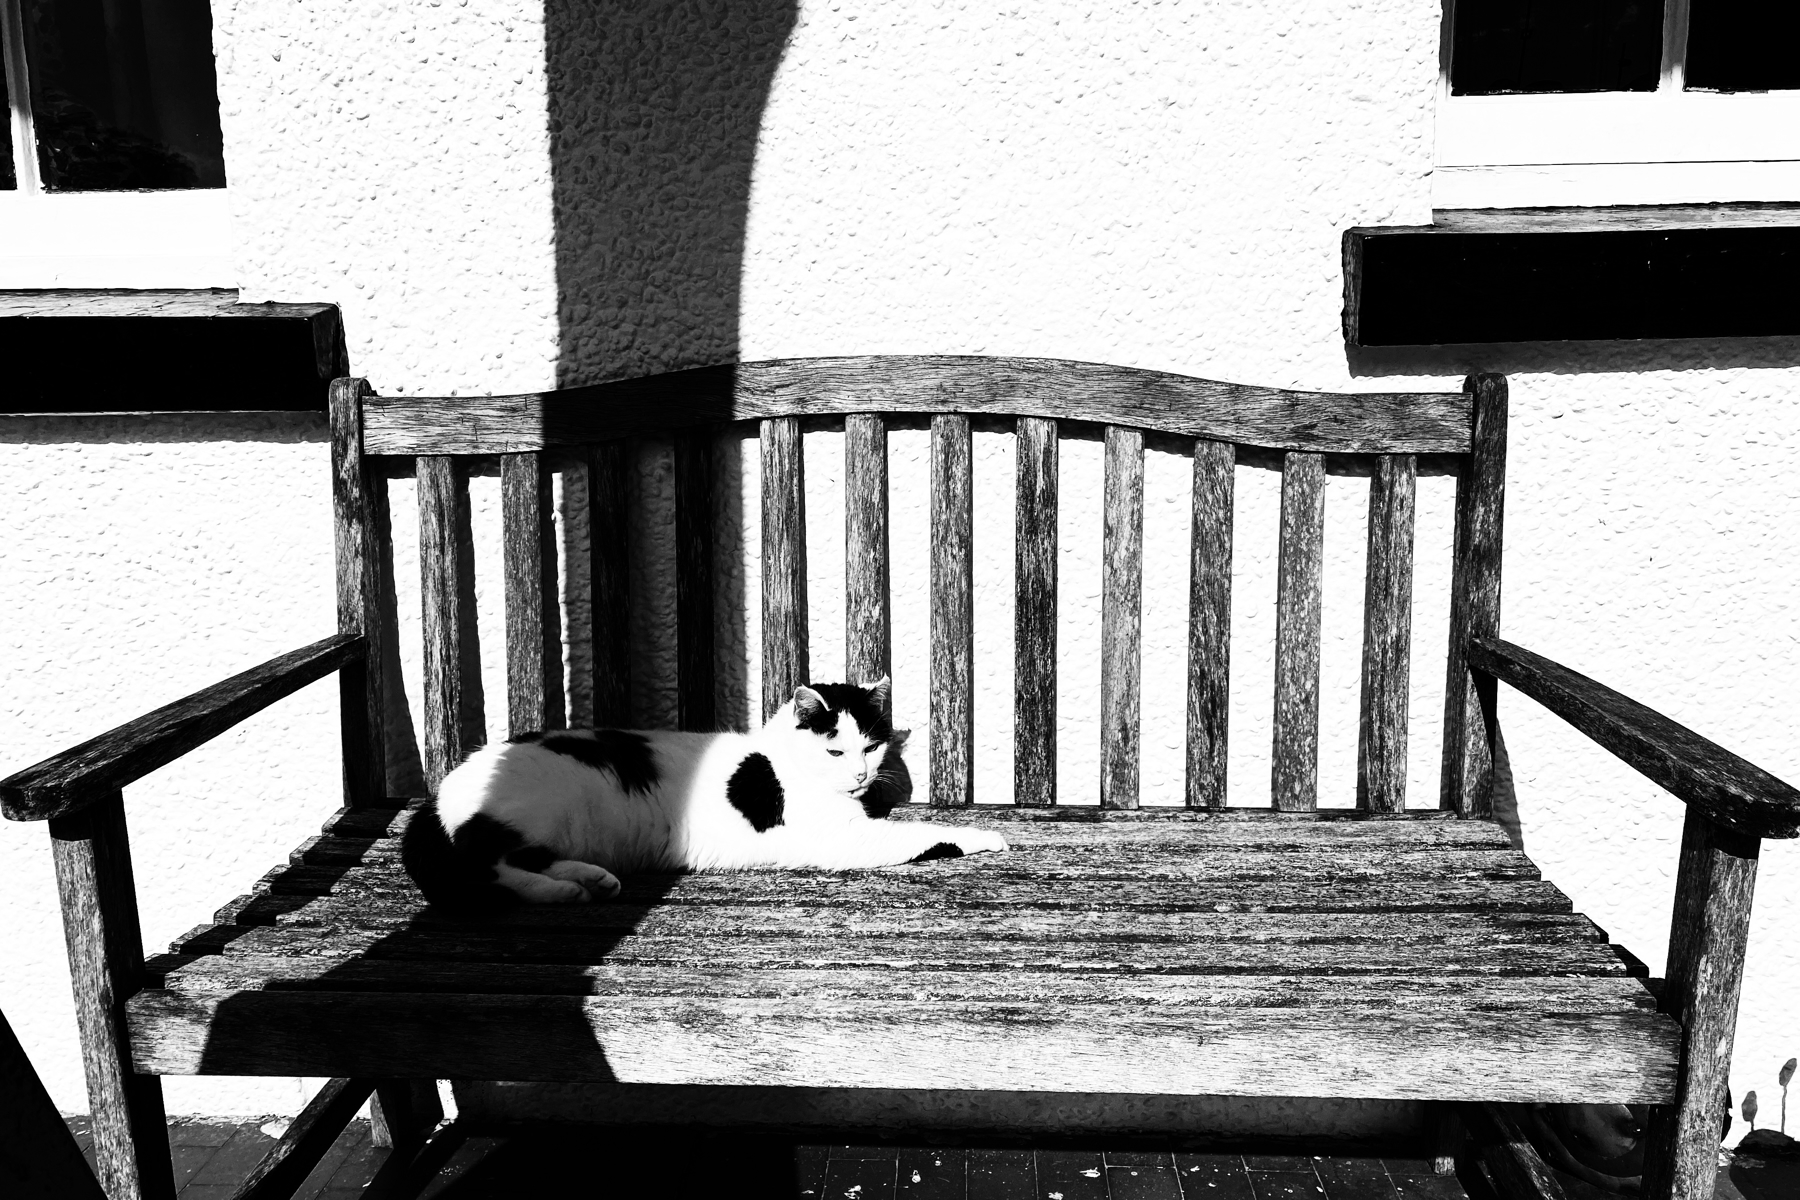 Black and white cat on a wooden bench